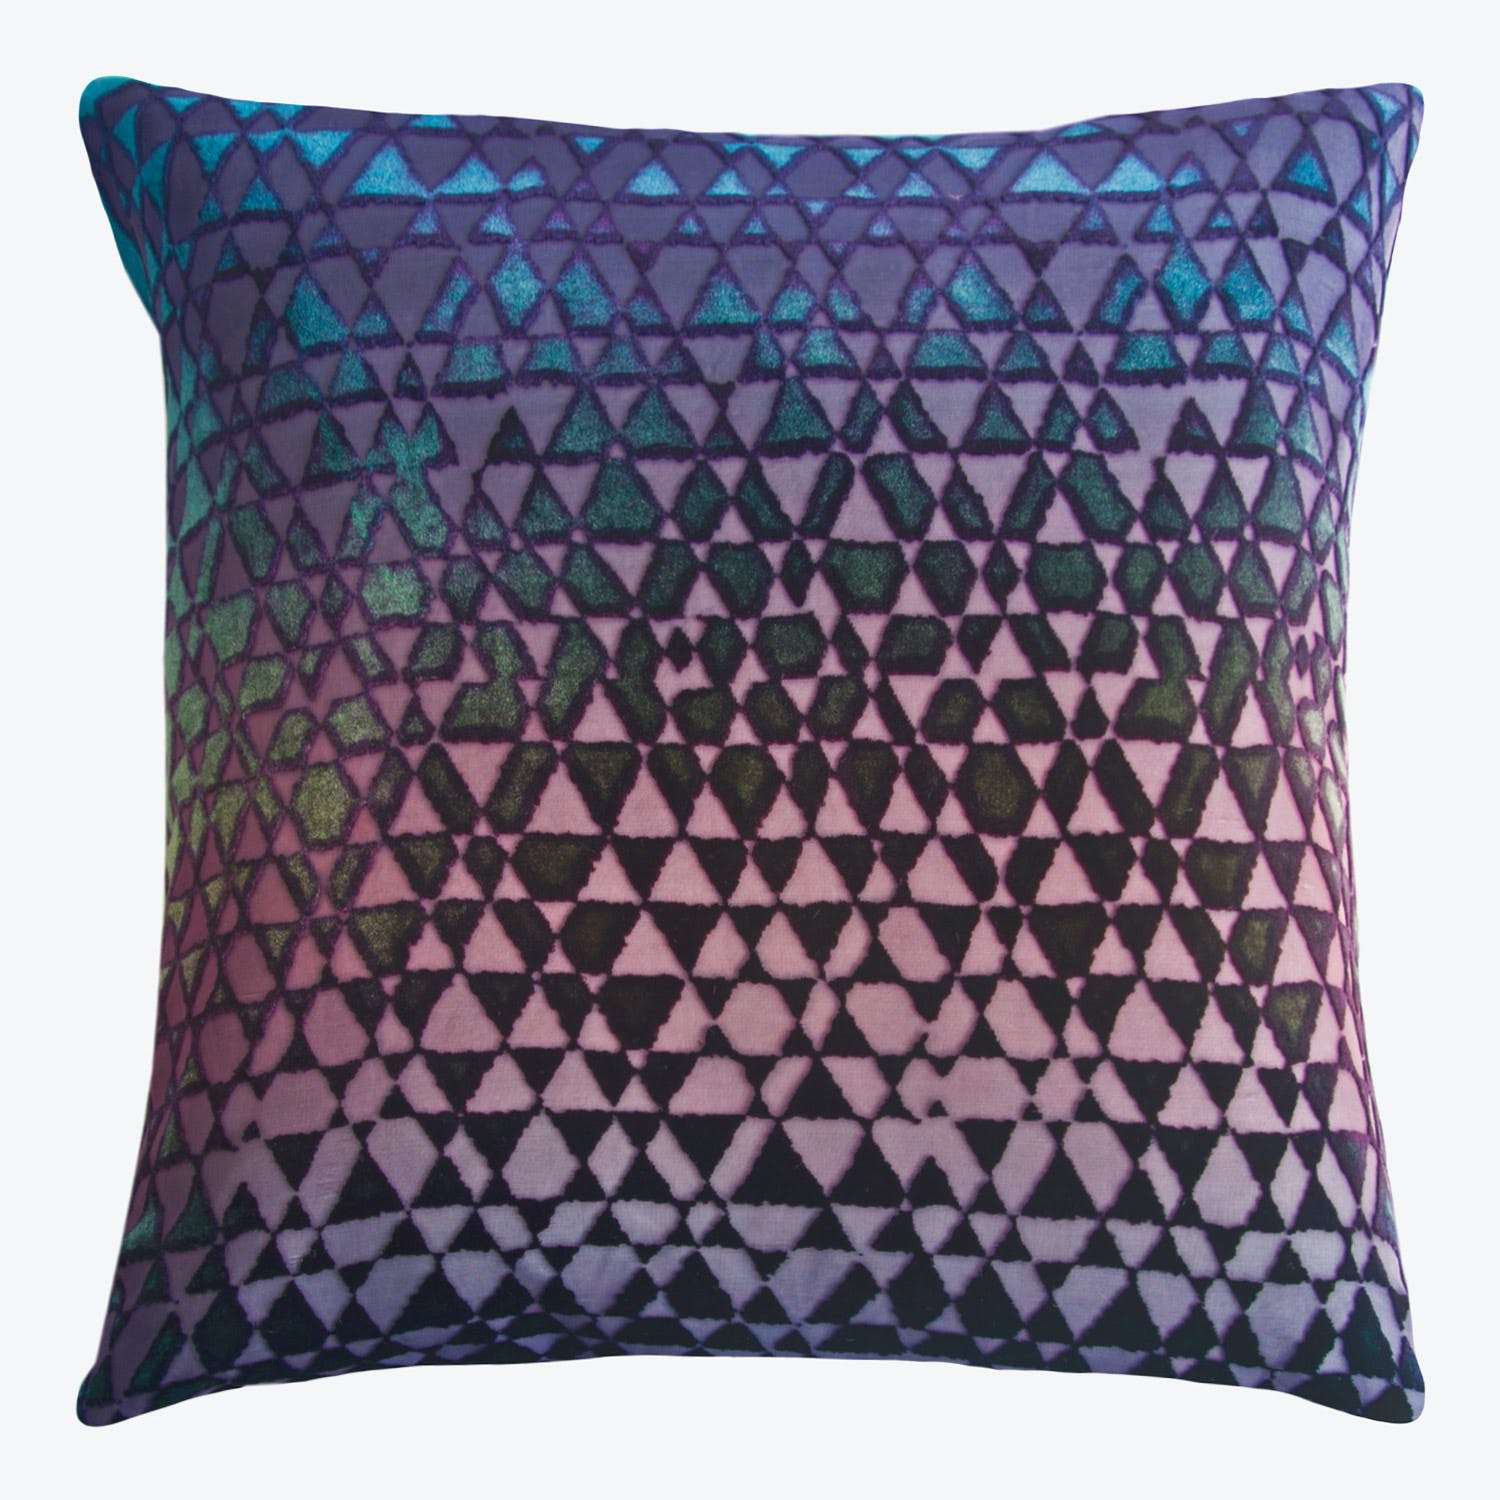 Small Moroccan Velvet Dec Pillows by Kevin O'Brien